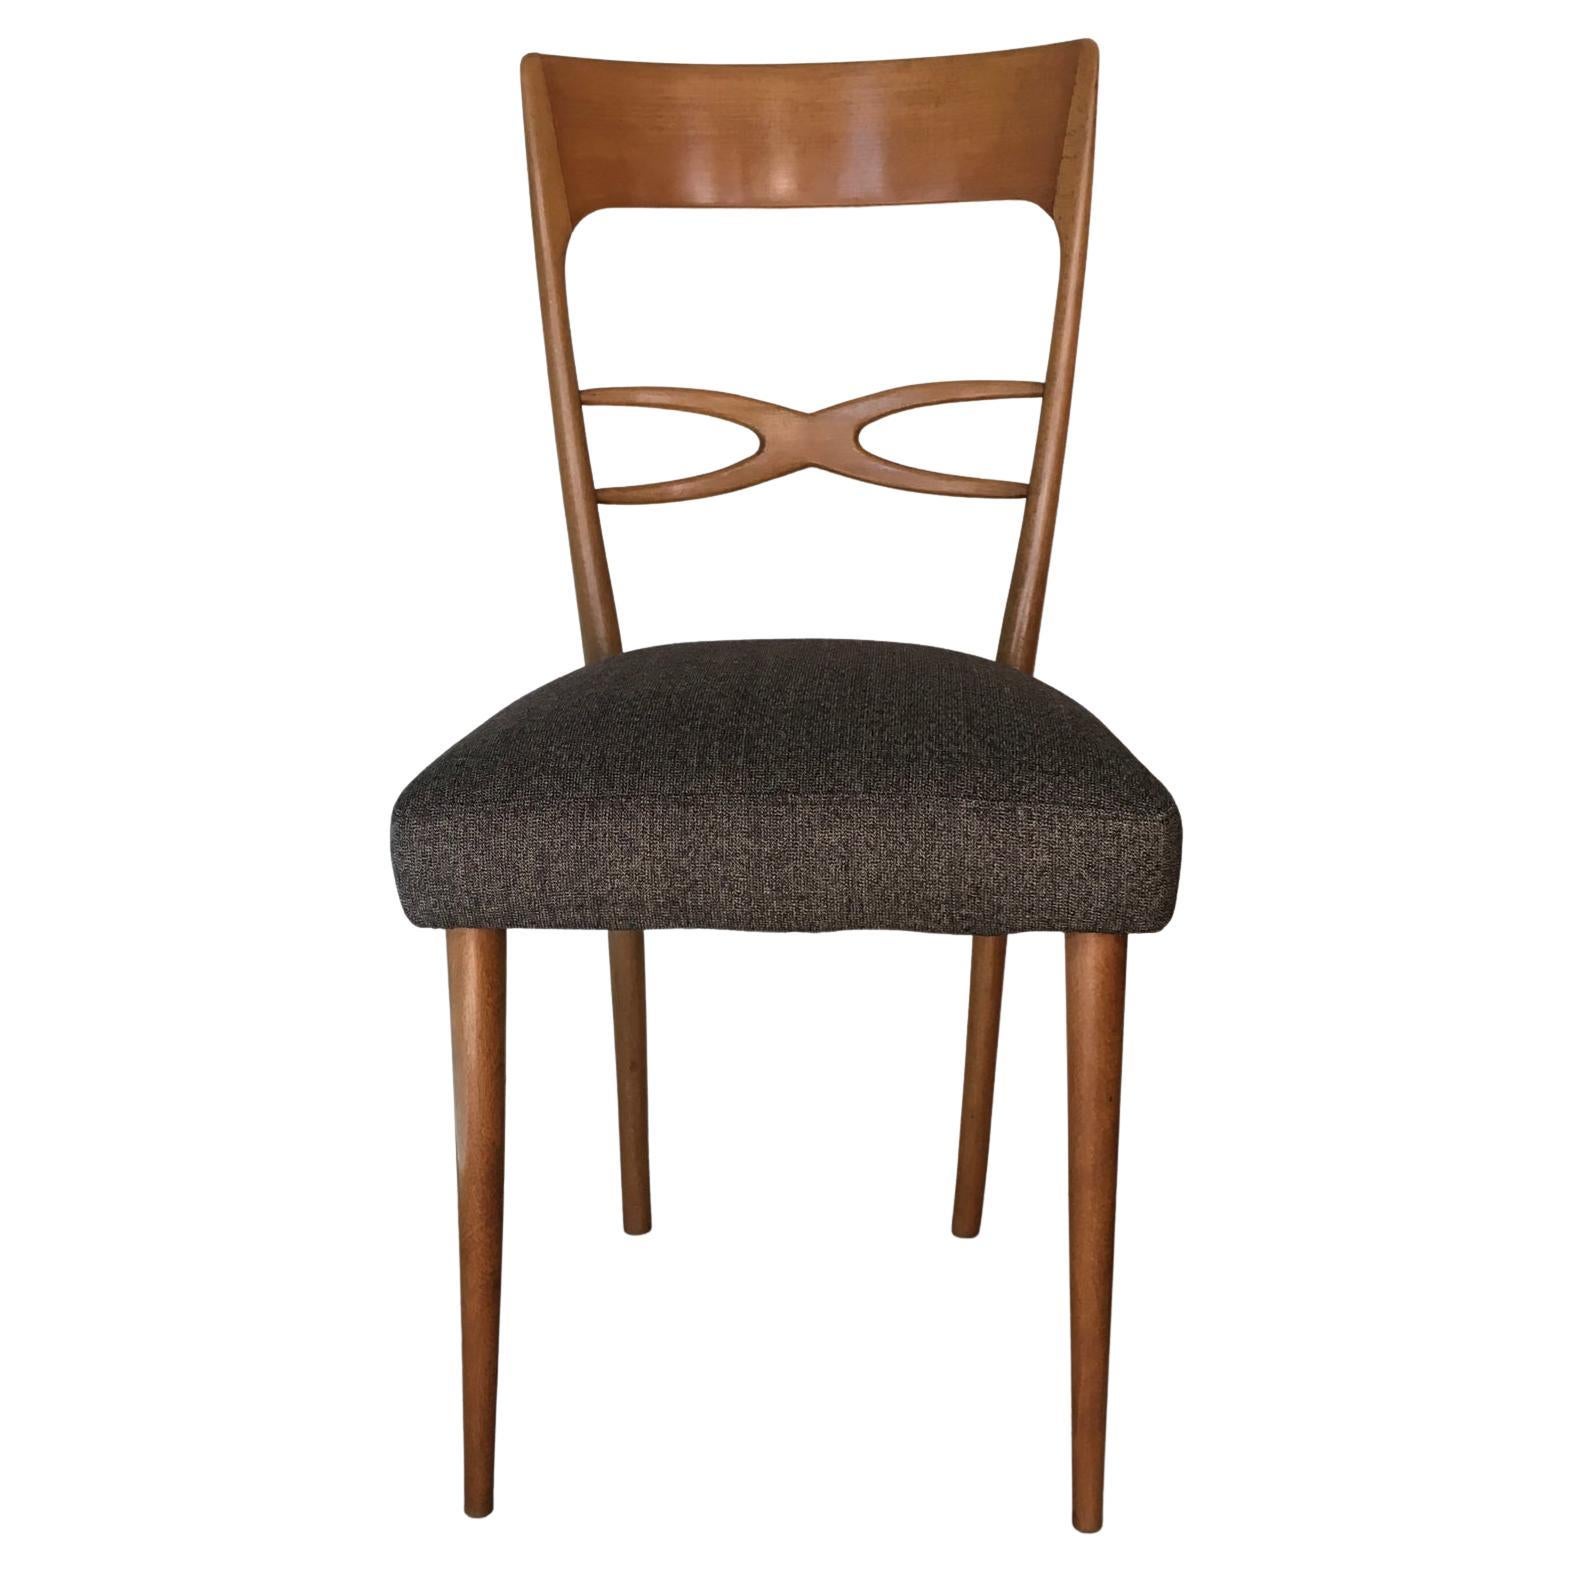 Mid-Century Modern 6 blond wood Midcentury Italian Dining Chairs, 1950s, attrib. to Melchiorre Bega For Sale